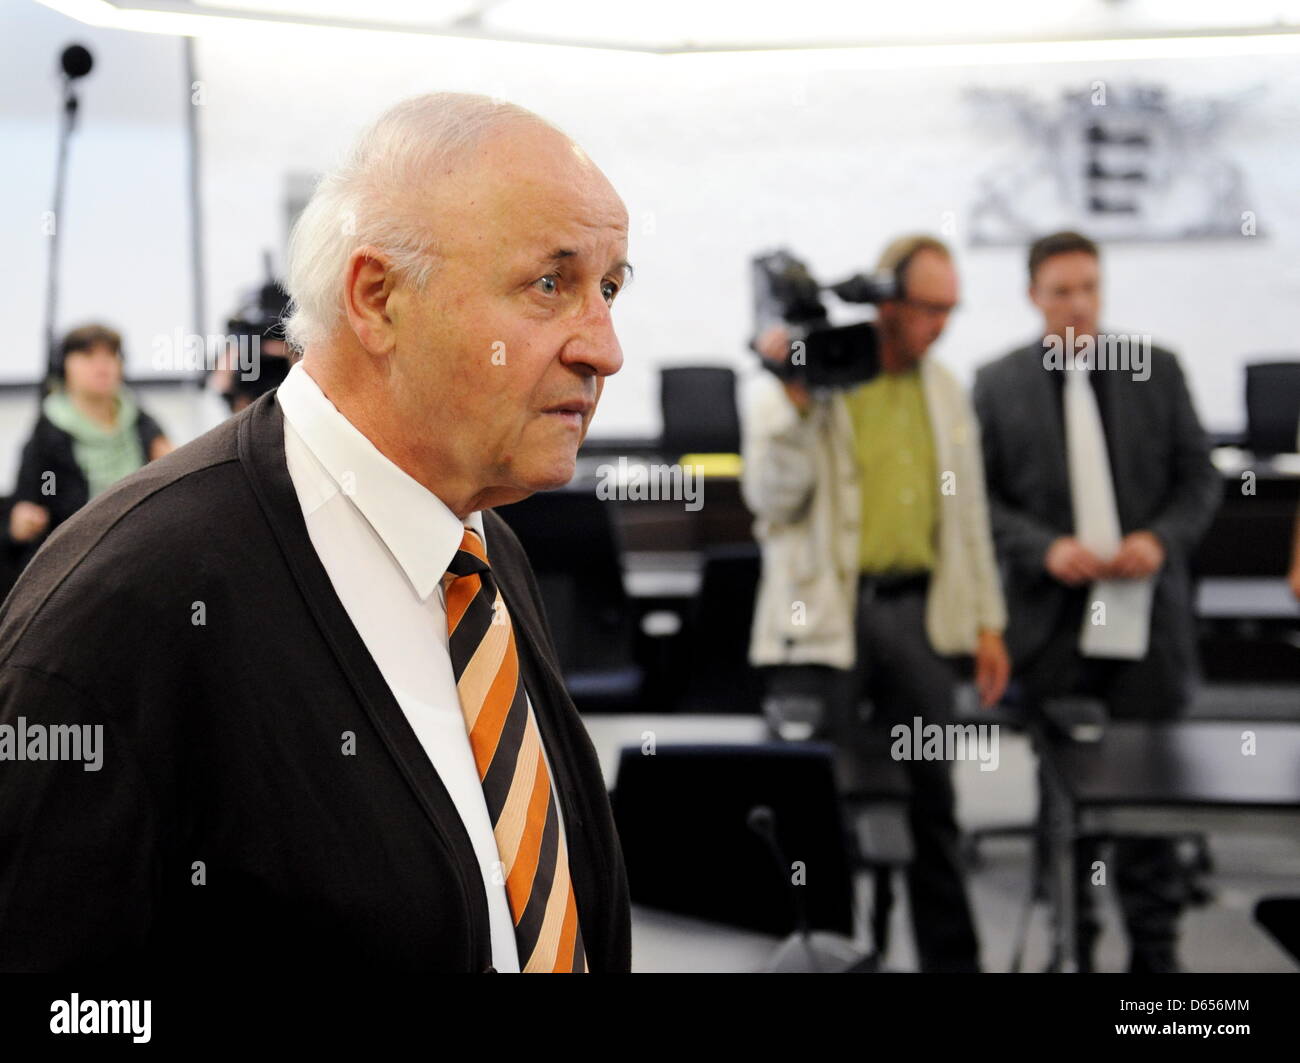 Michael Buback, joint plaintiff in the trial against former RAF terrorist Becker, enters a courtroom of the Higher Regional Court in Stuttgart, Germany, 12 June 2012. The court is hearing the case on the complicity of Becker in the murder of former Attorney General Buback, the father of Michael Buback. Photo: Bernd Weissbrod Stock Photo